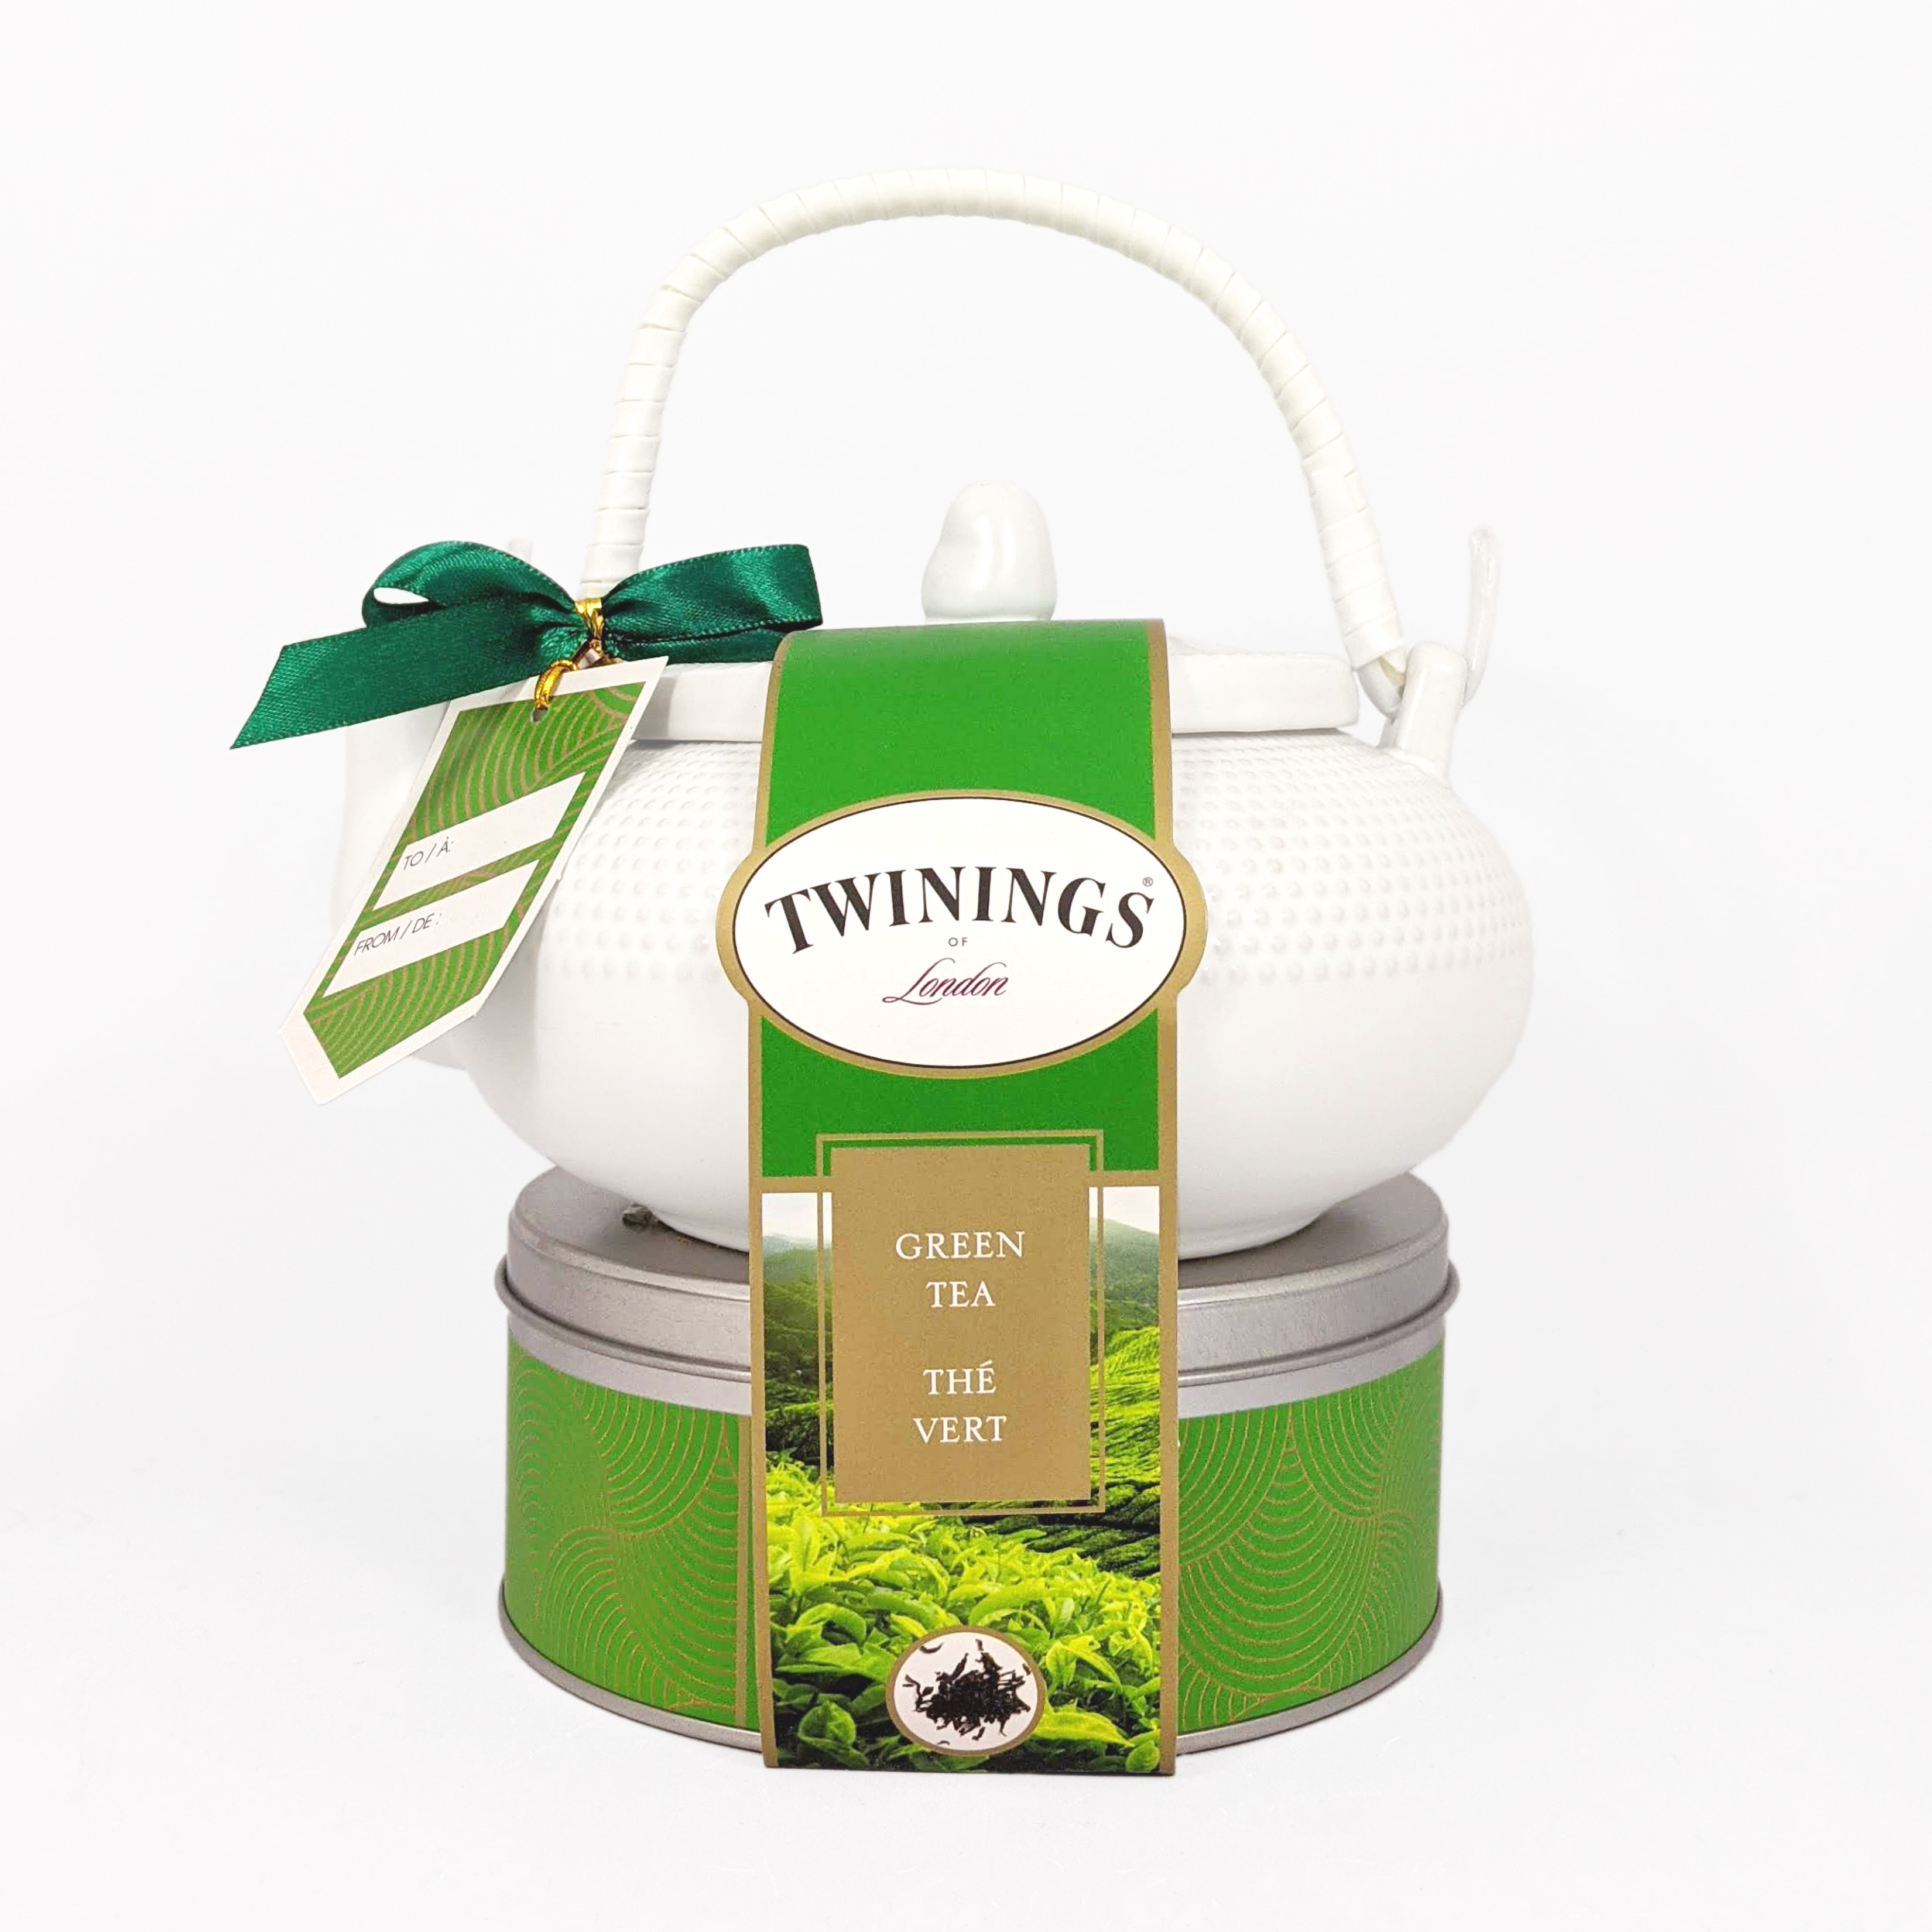 Twinings Ceramic Teapot And Canister - image 2 of 2